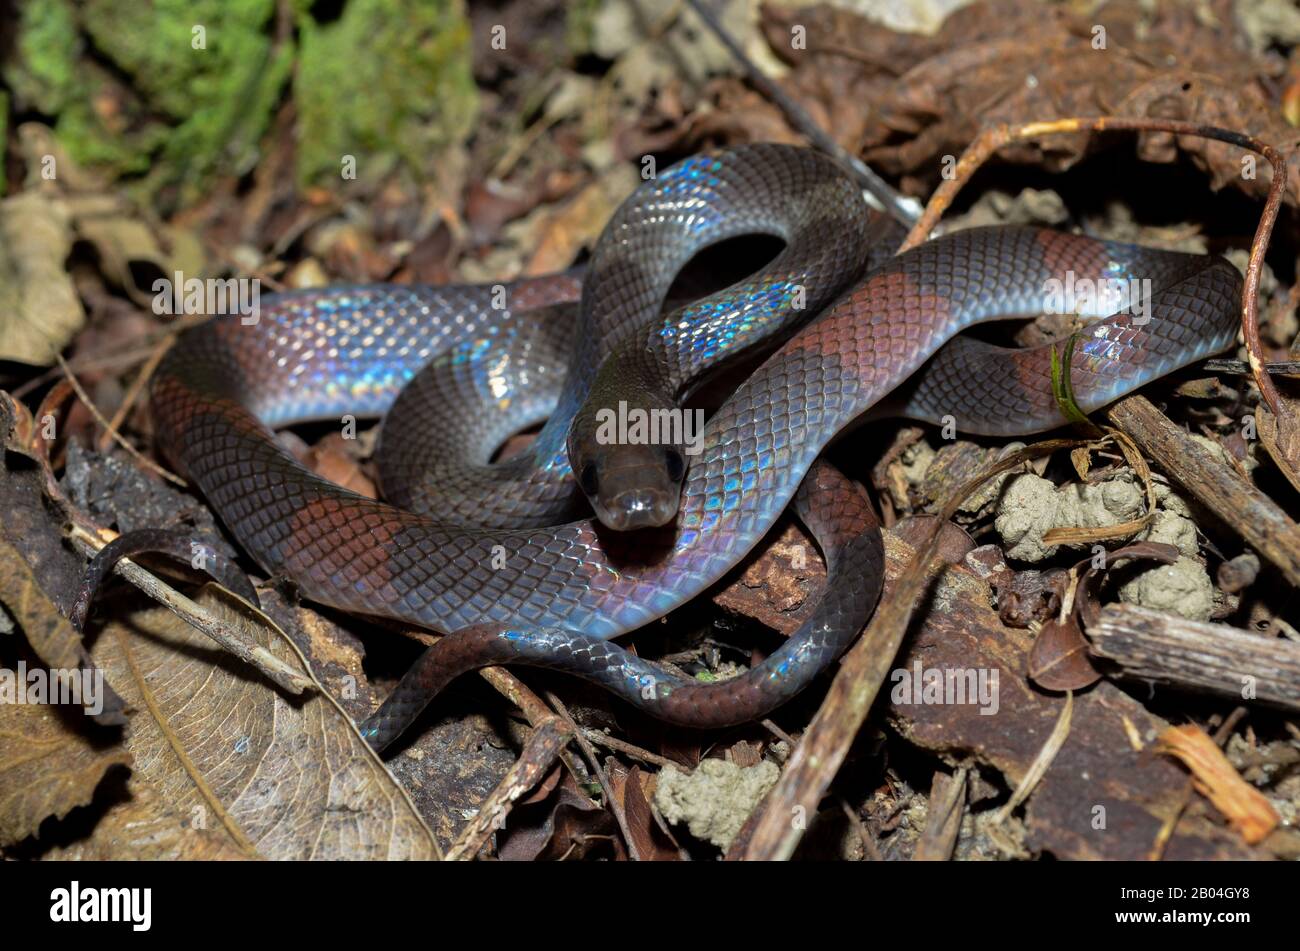 Oxyrhopus petola, commonly known as the false coral or calico snake, is a species of colubrid snake endemic to South America. Stock Photo